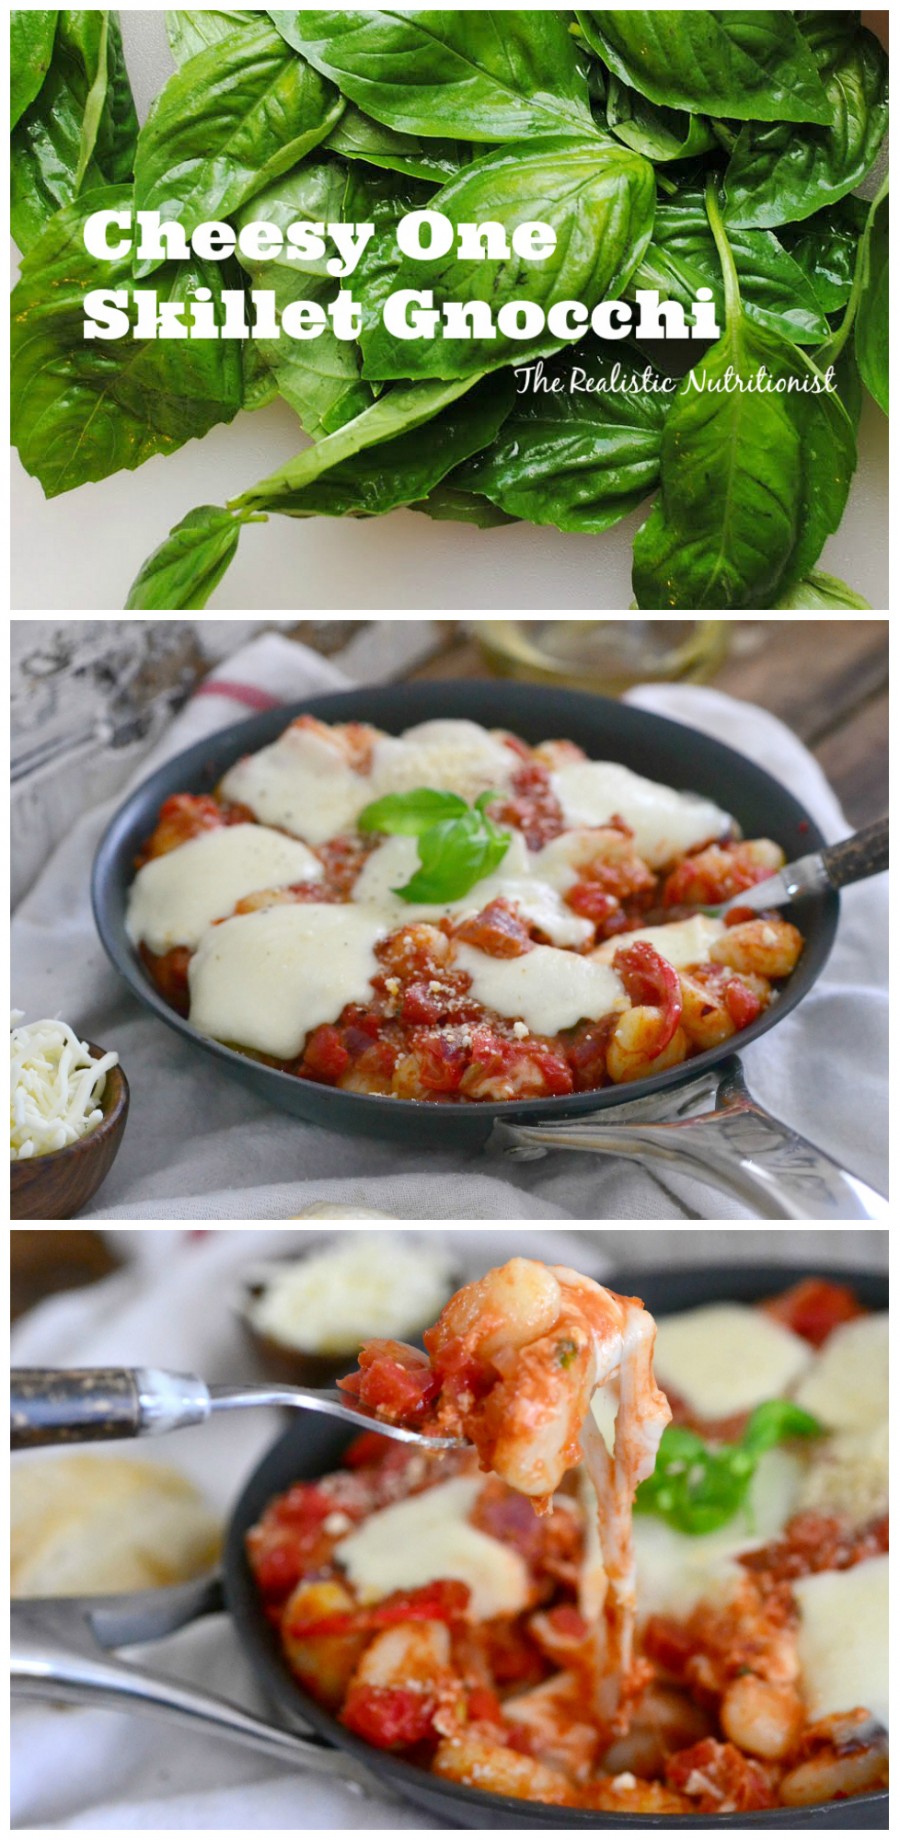 Cheesy One Skillet Gnocchi | The Realistic Nutritionist